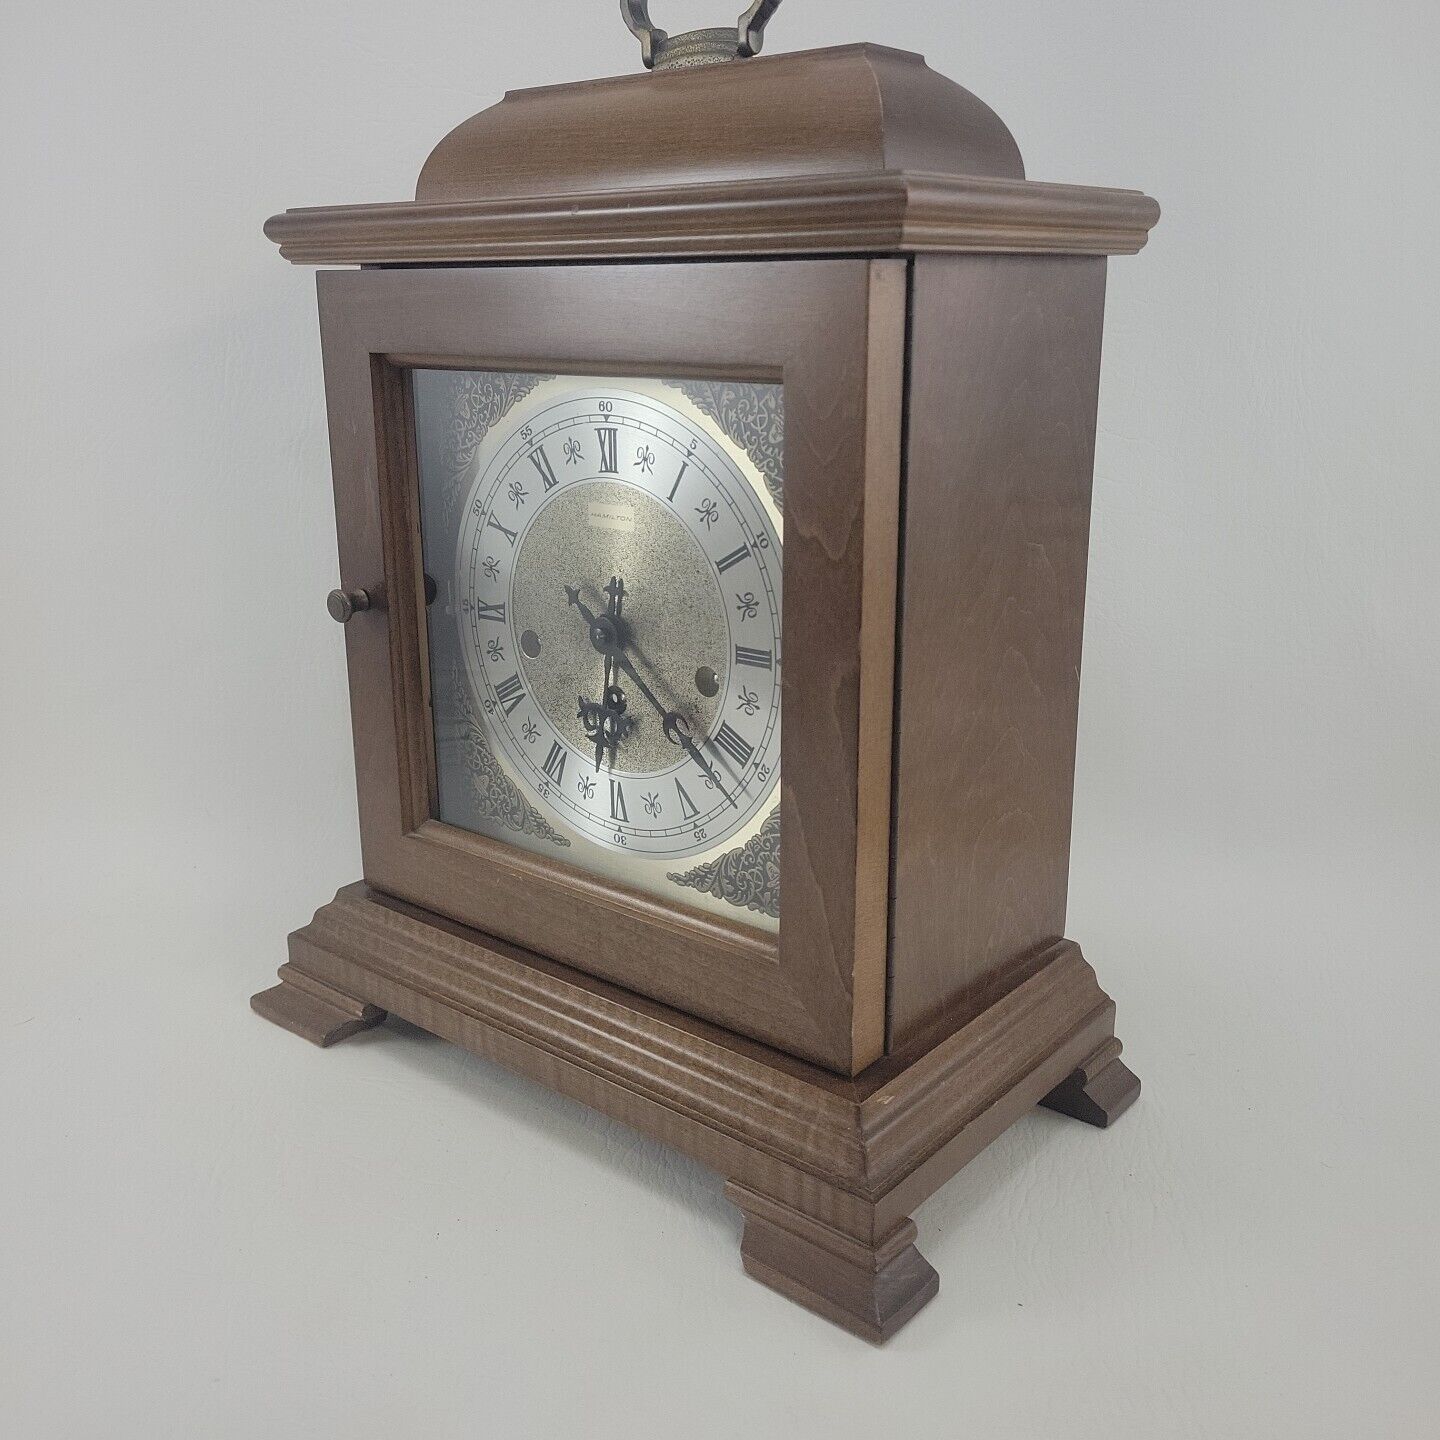 Hamilton Wheatland Westminster Chime Mantle Clock #340-020 W Germany, Tested